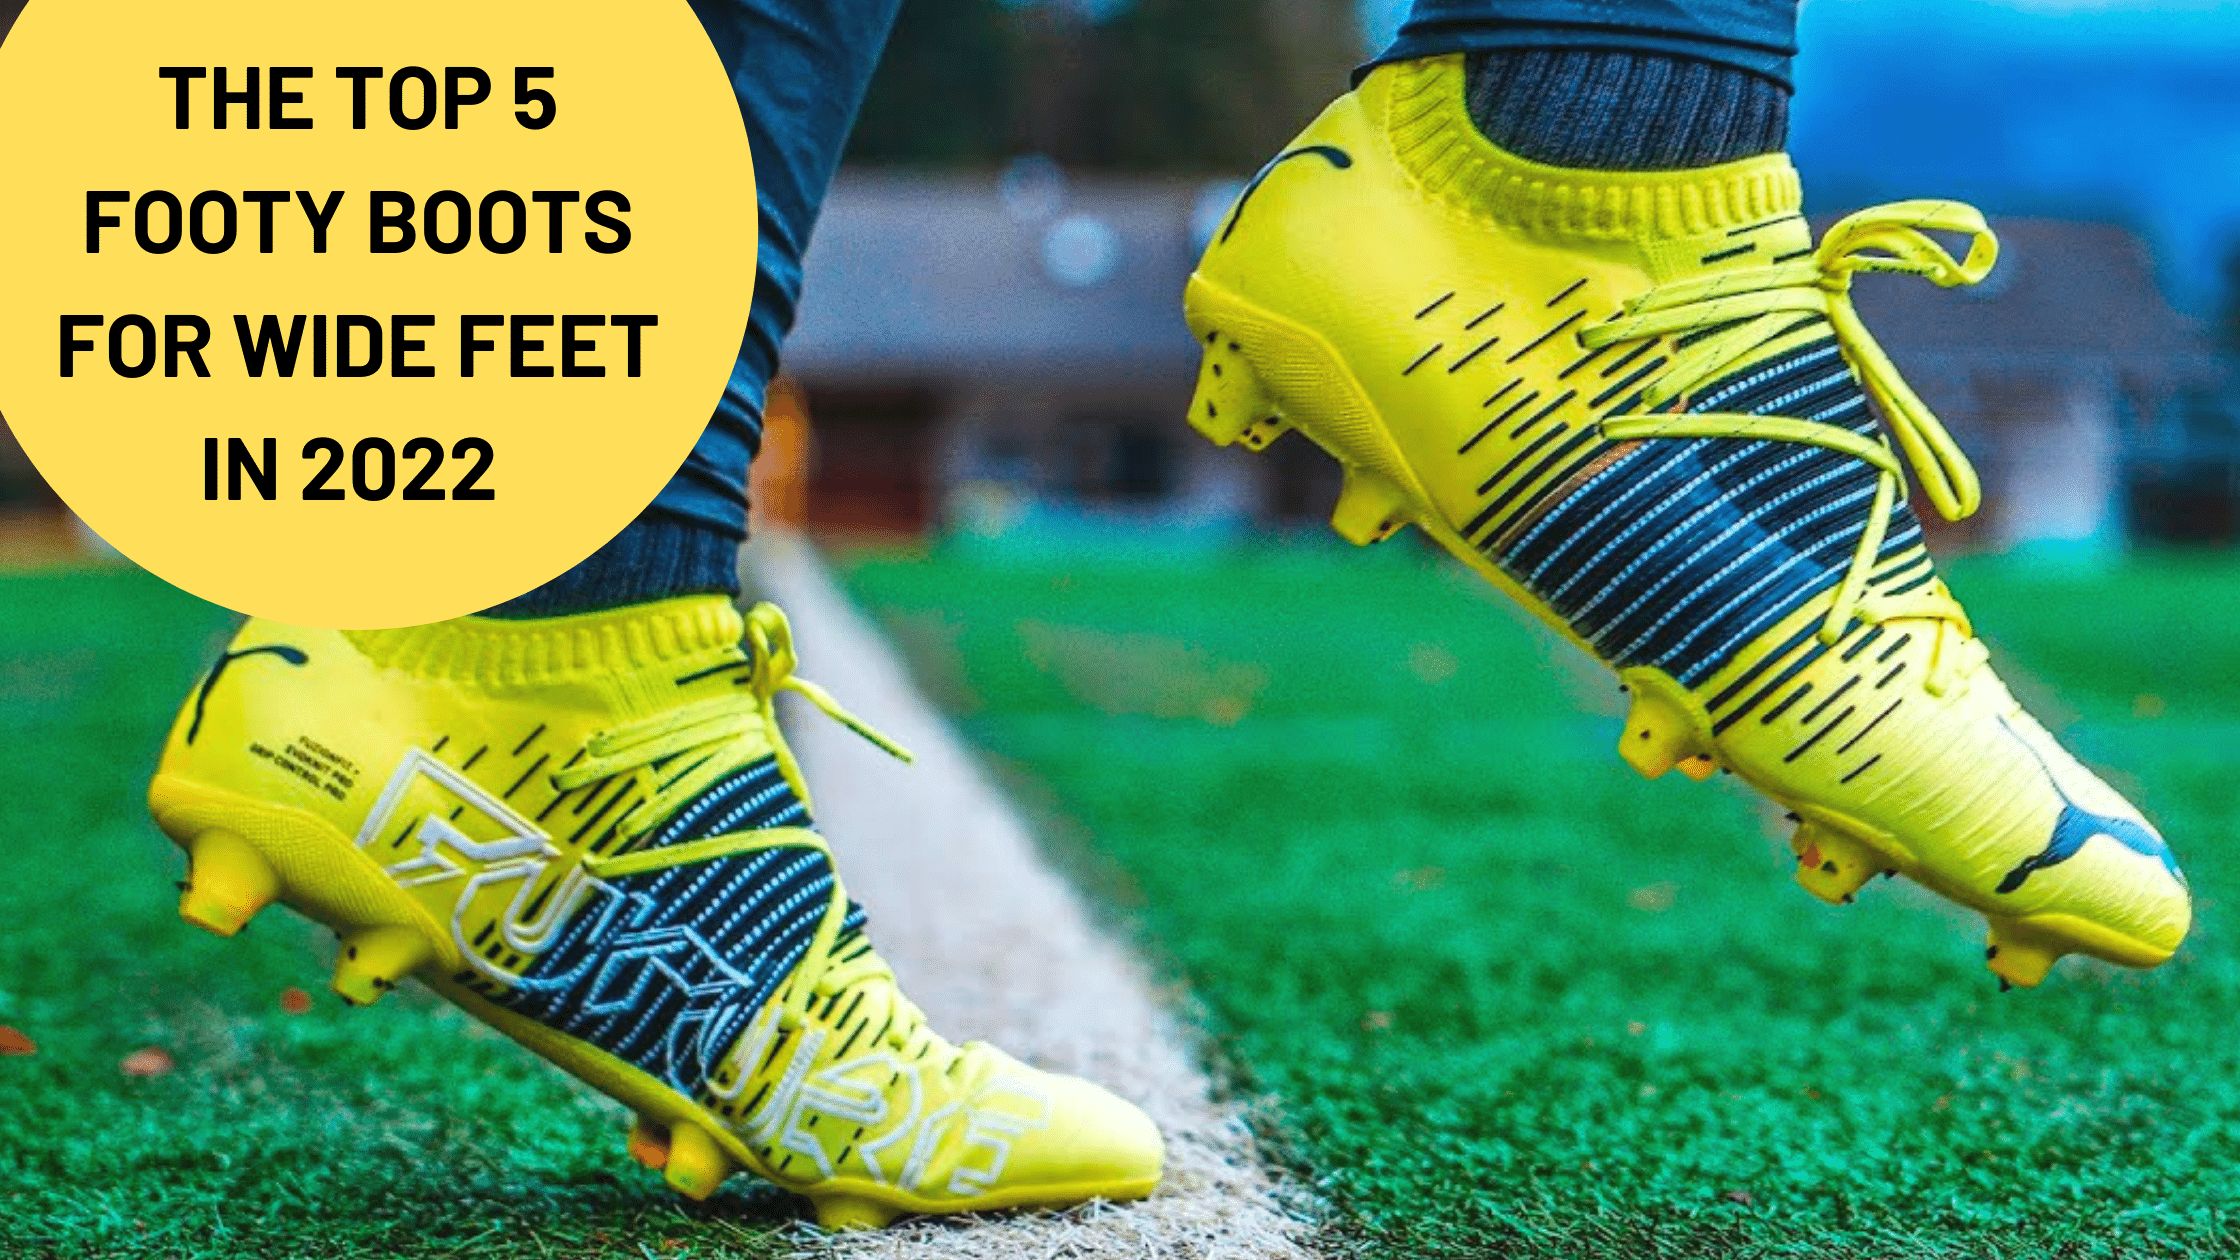 Nevelig levend riem THE TOP 5 FOOTY BOOTS FOR WIDE FEET IN 2022 - Well Heeled Podiatry